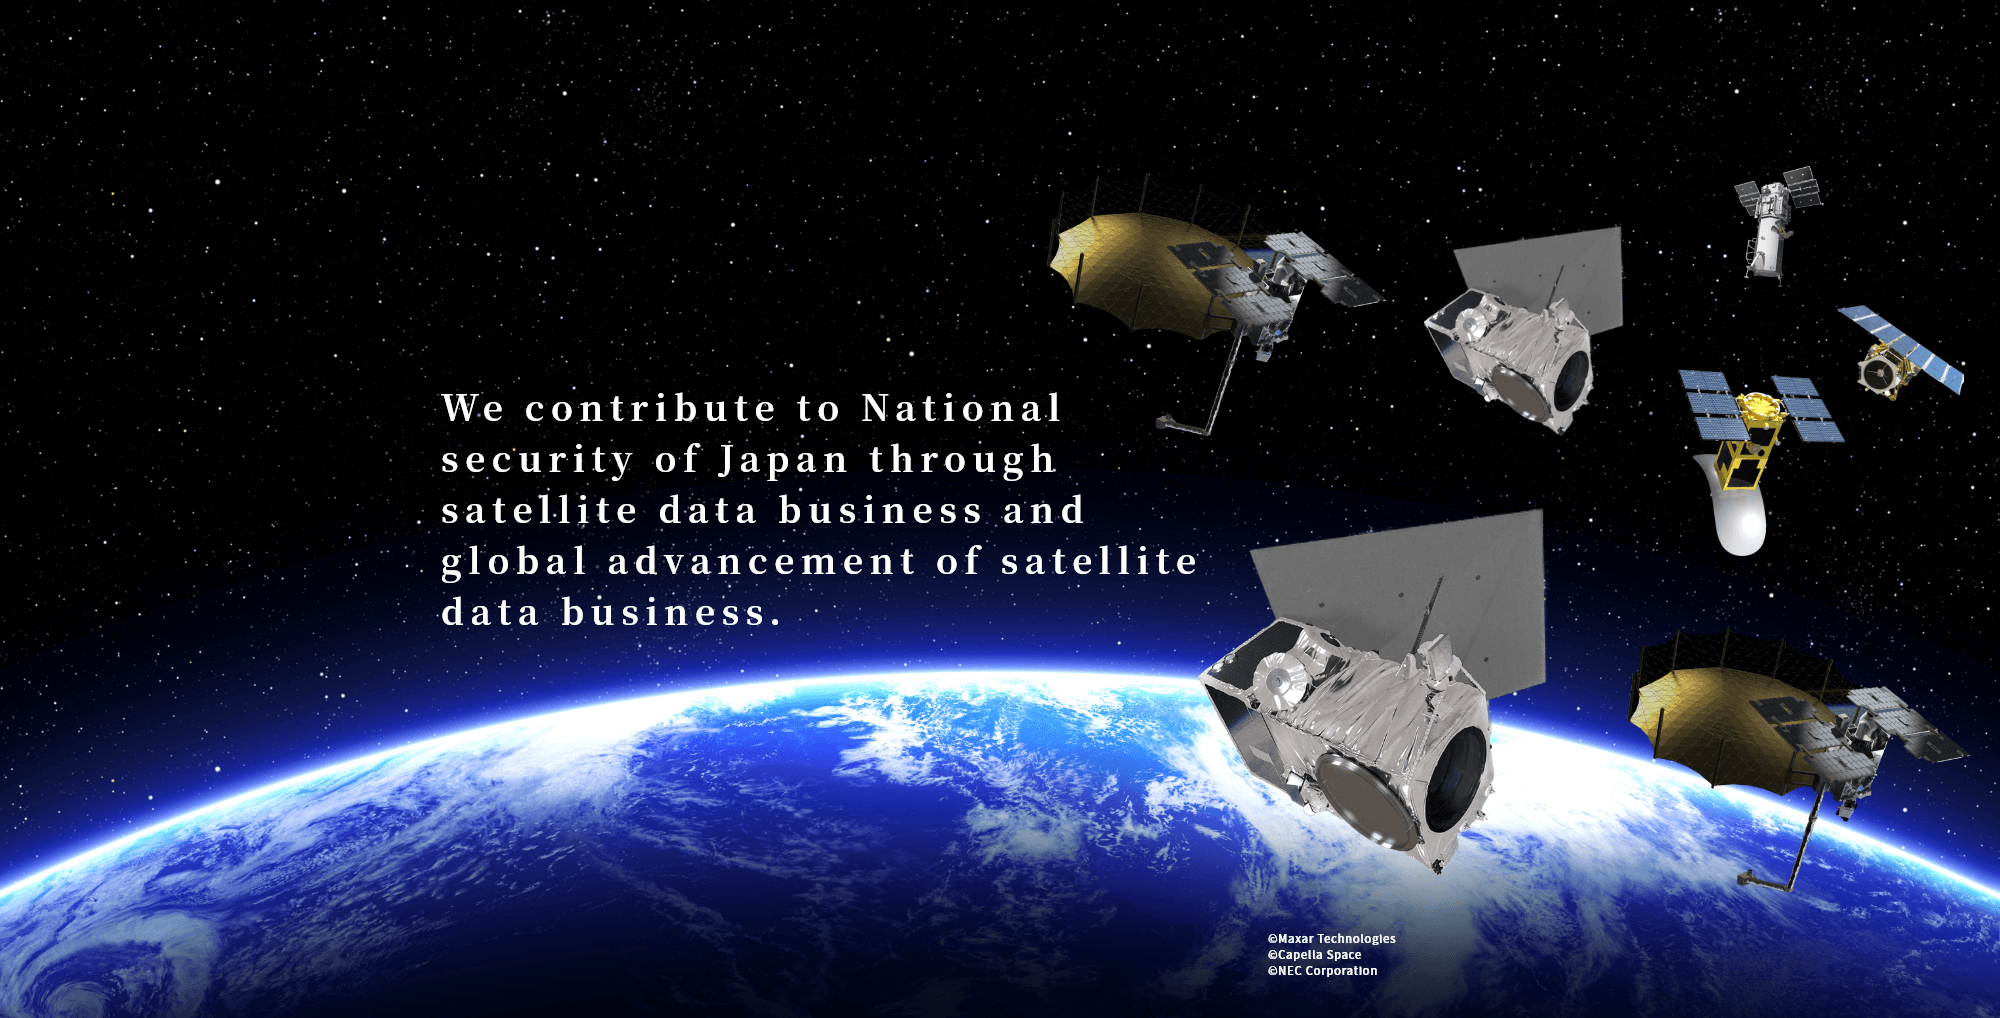 We contribute to national security of Japan through satellite data business and global advancement of satellite data business.